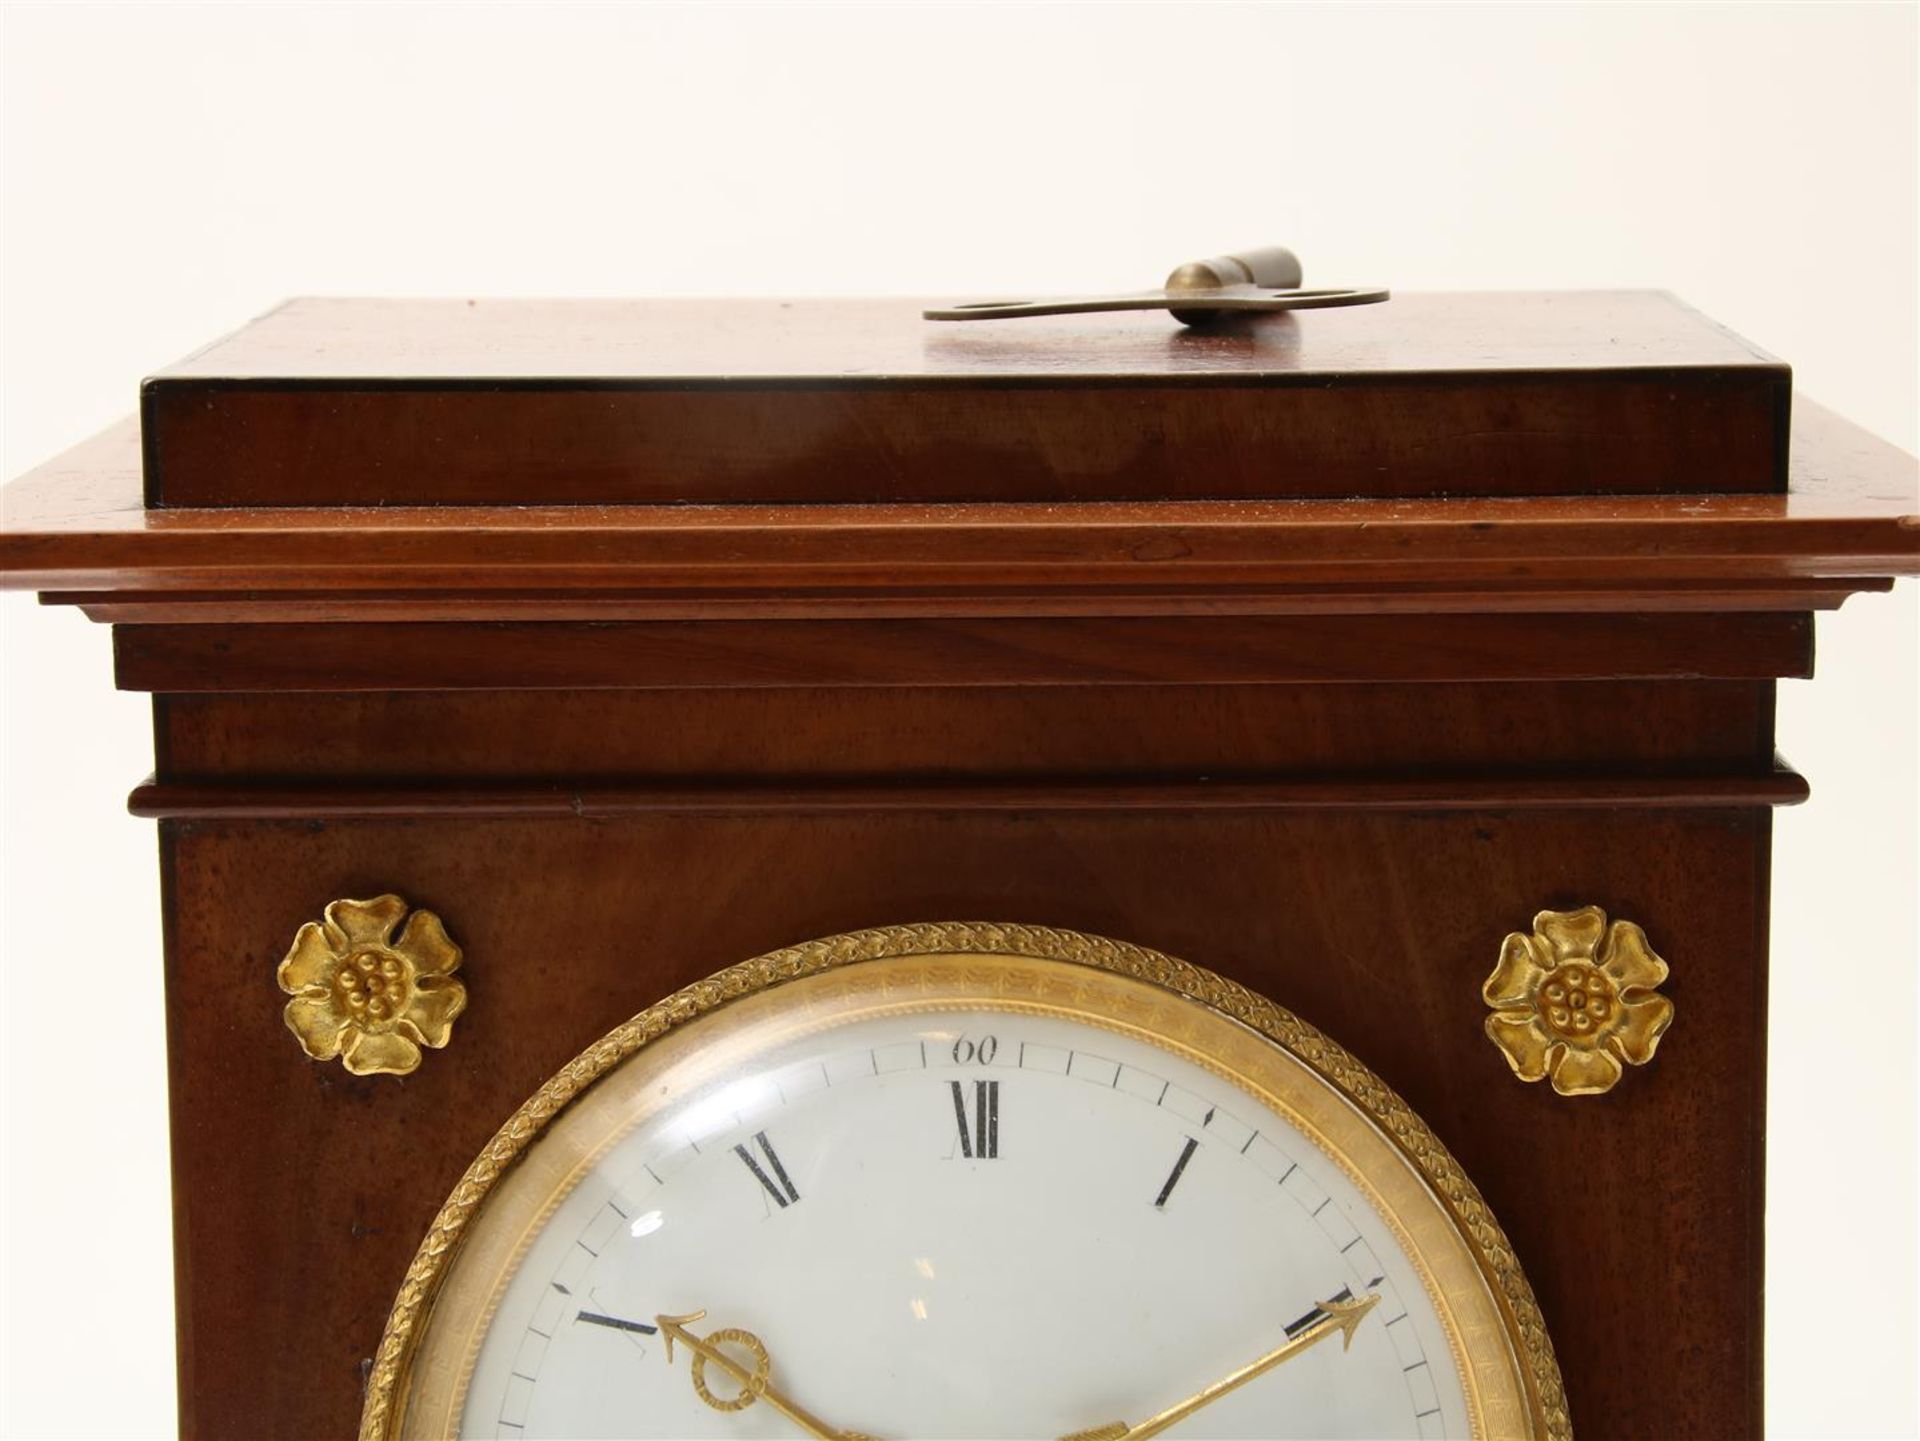 Empire mantel clock in mahogany case with white enamel dial with Roman numerals and fire-gilt Sphinx - Image 2 of 5